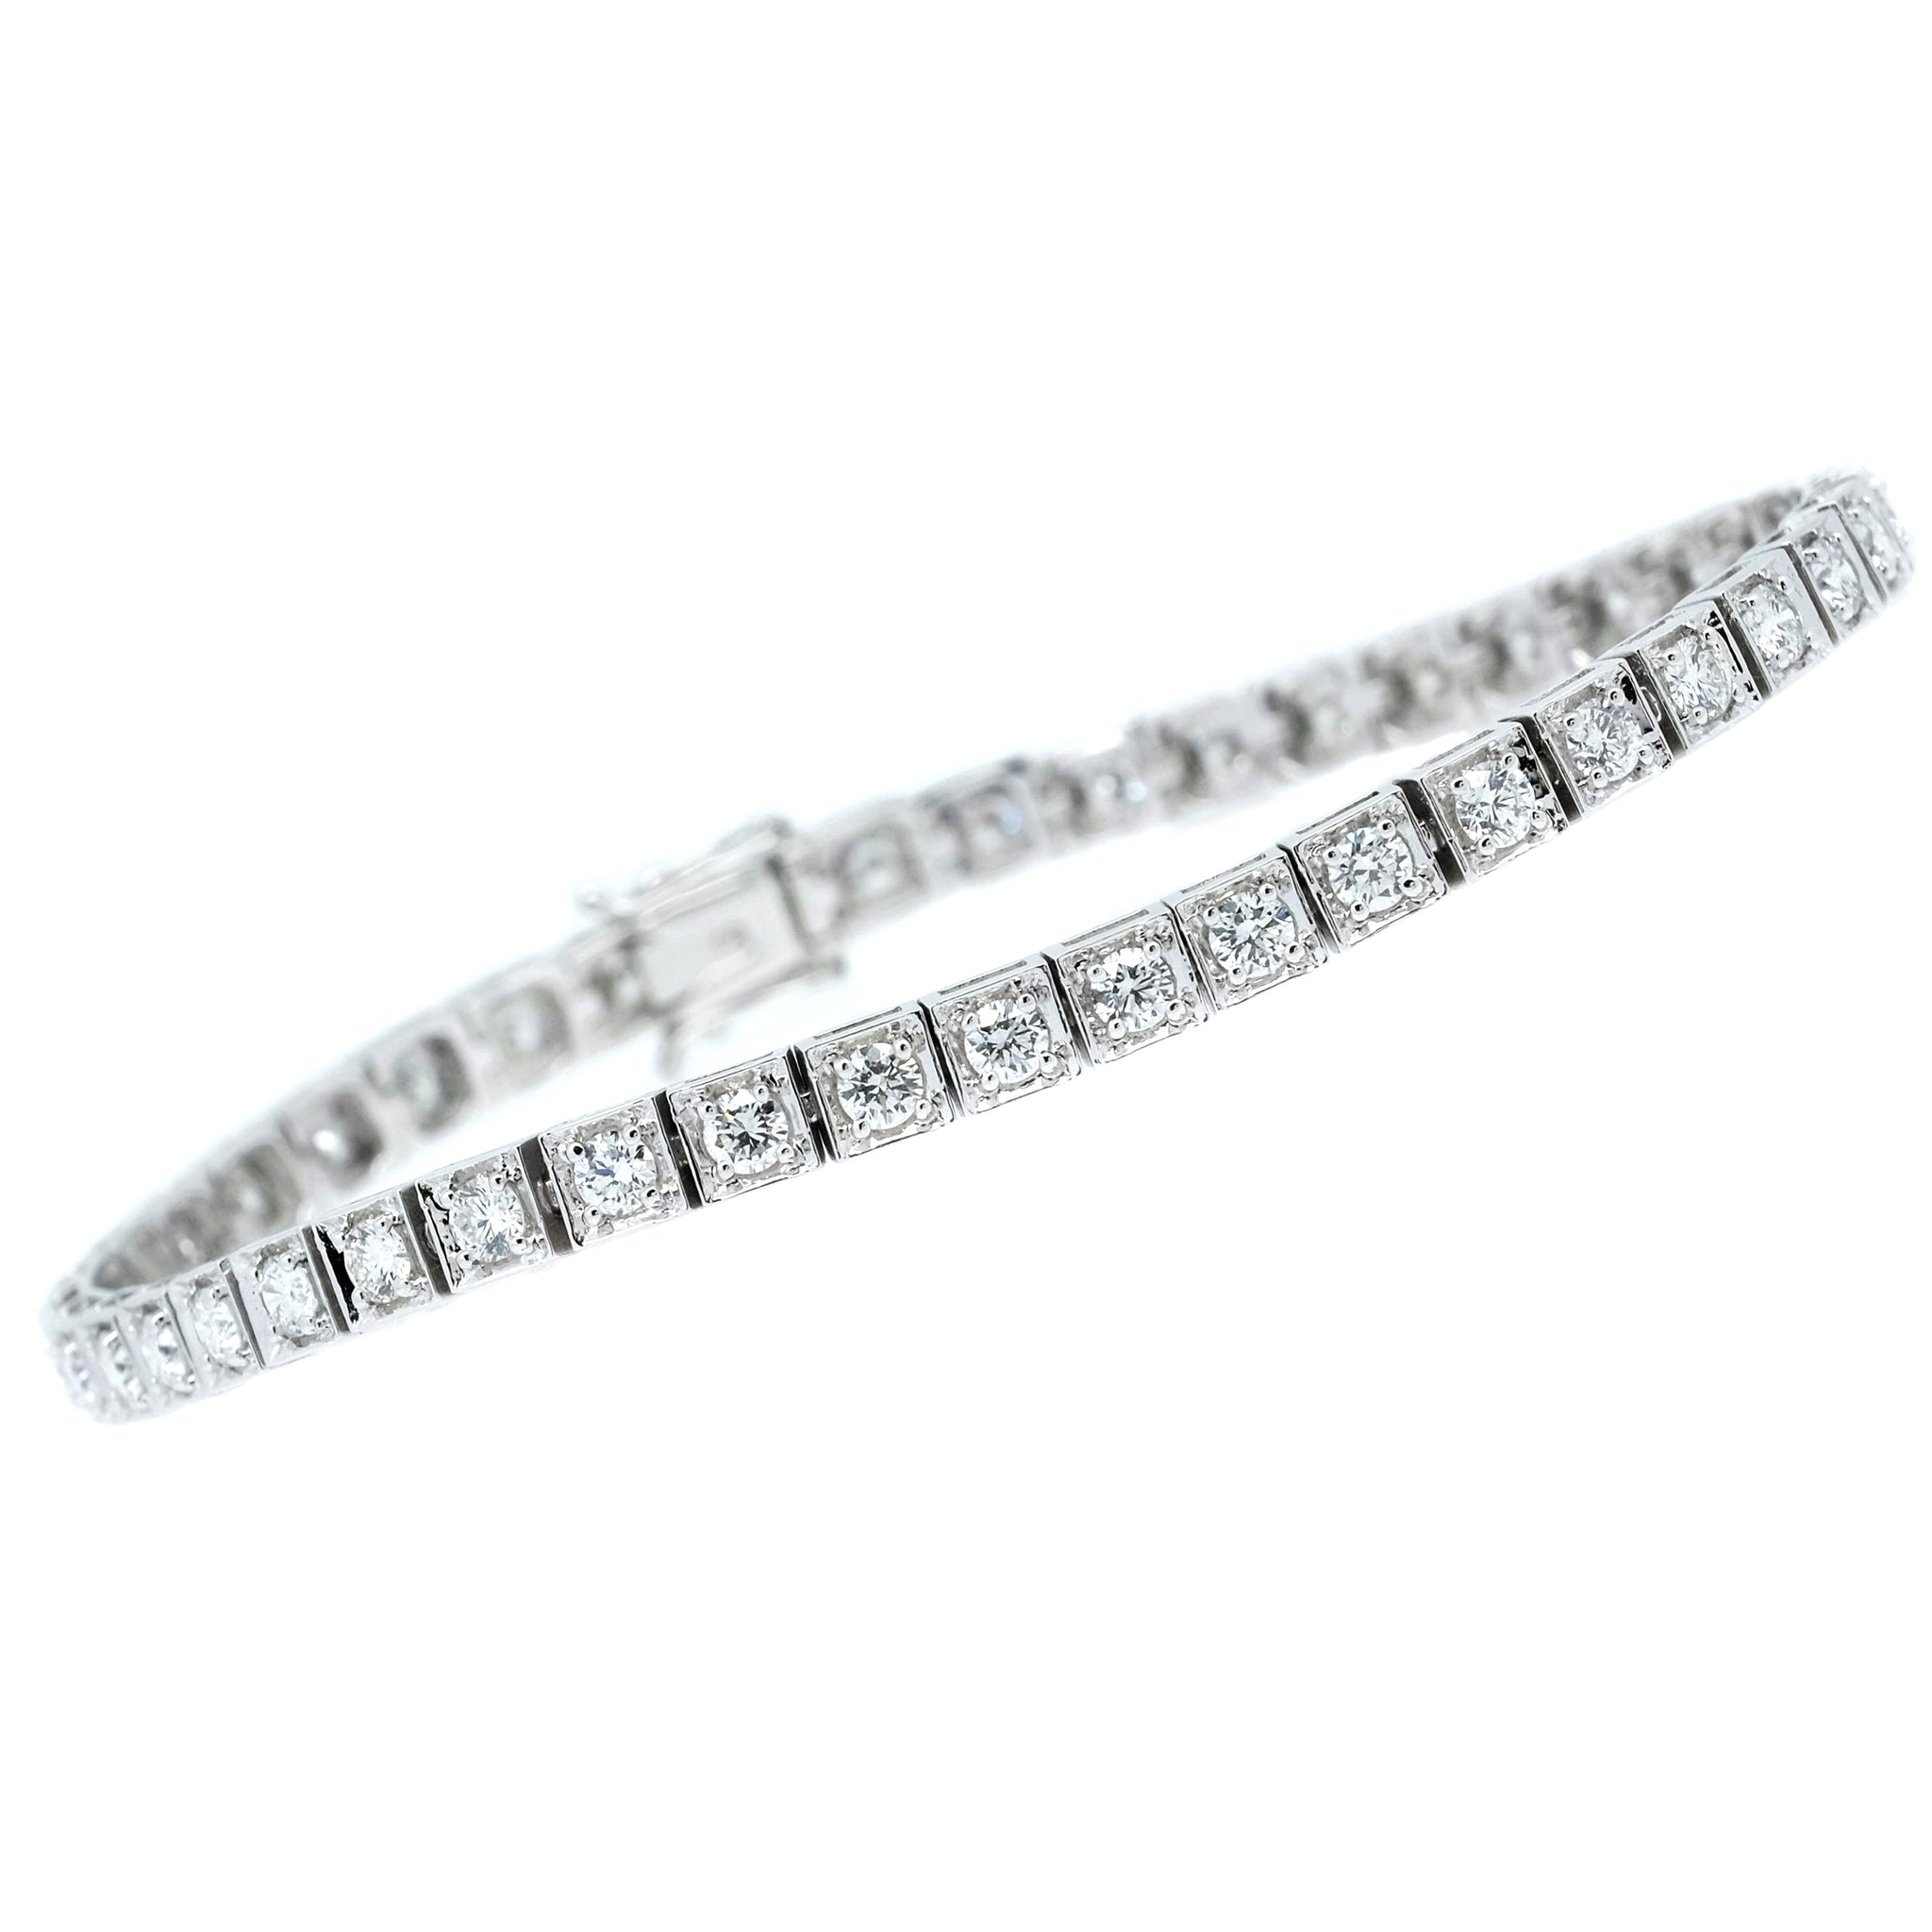 4 Prong Diamond Tennis Bracelet in 14K White Gold 2.00Ct TW | West and  Company | Auburn, NY